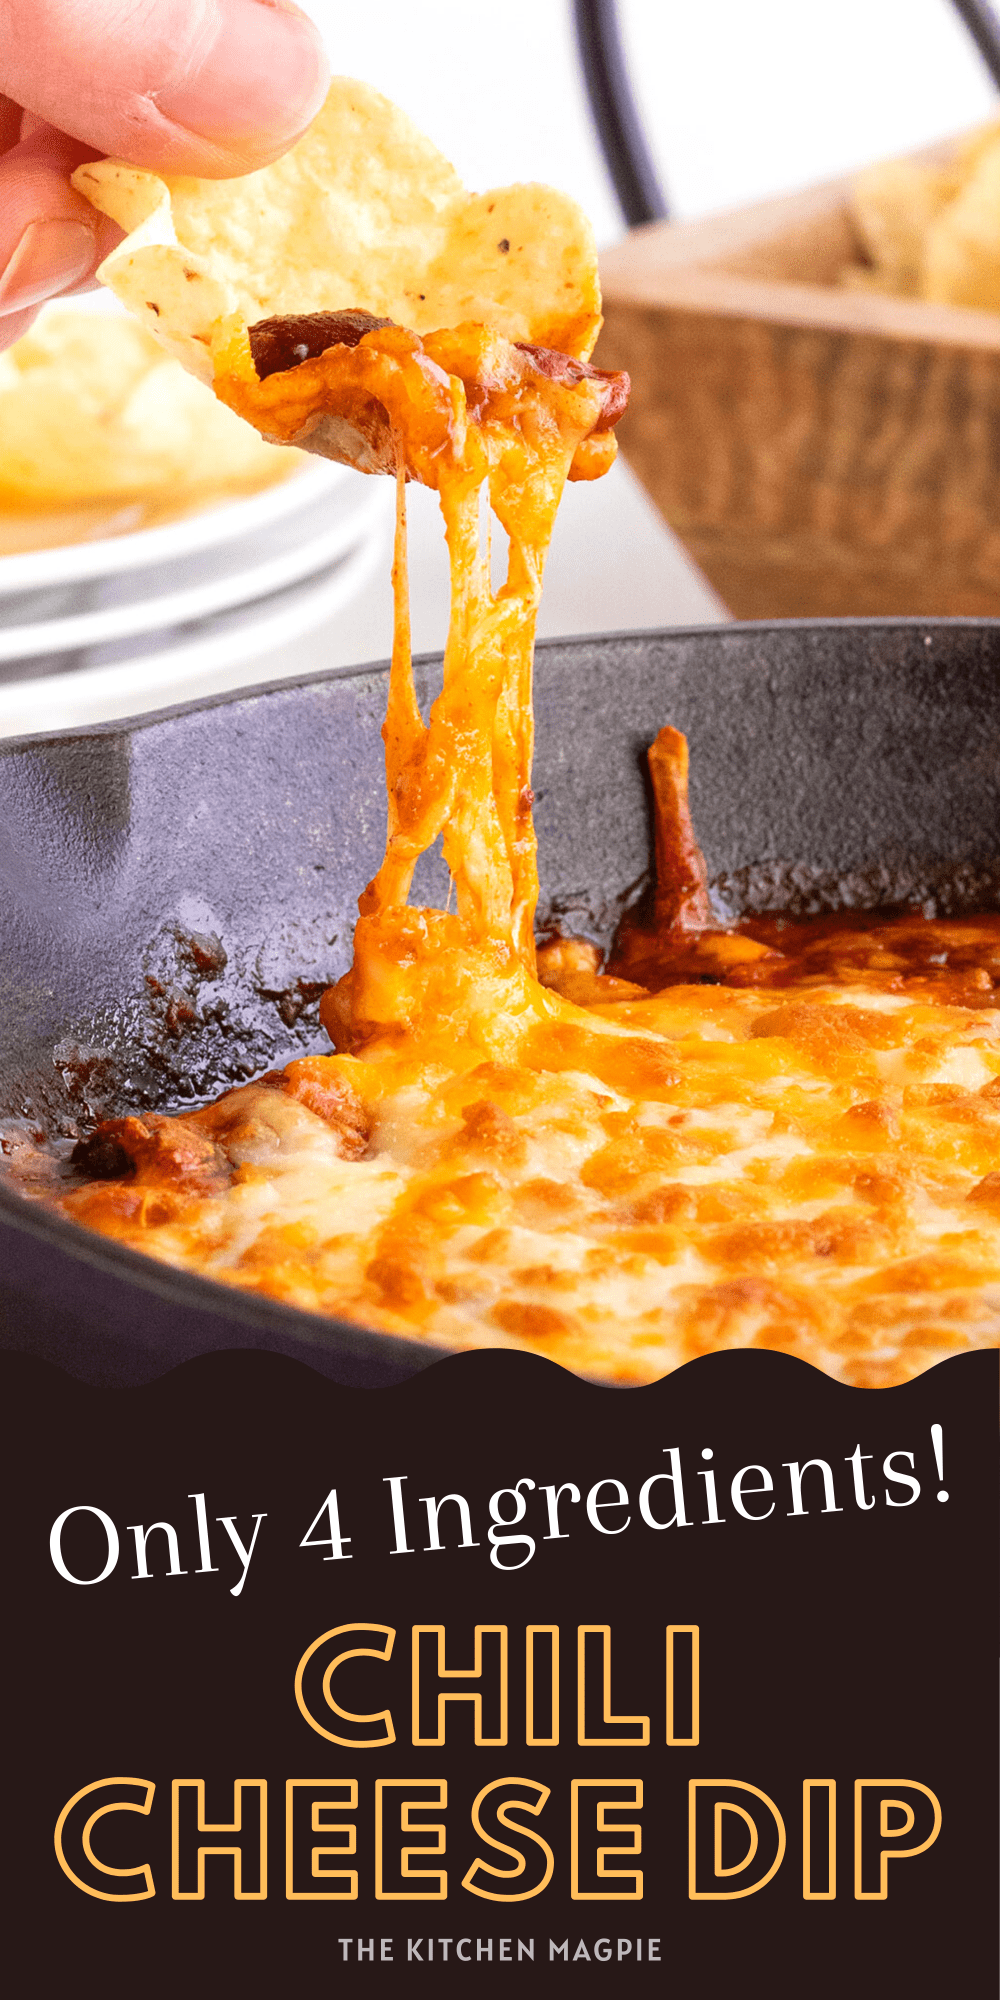 This delicious, hot, melty chili cheese dip is only 4 ingredients! This is the perfect fast dip for your game day or holiday party!